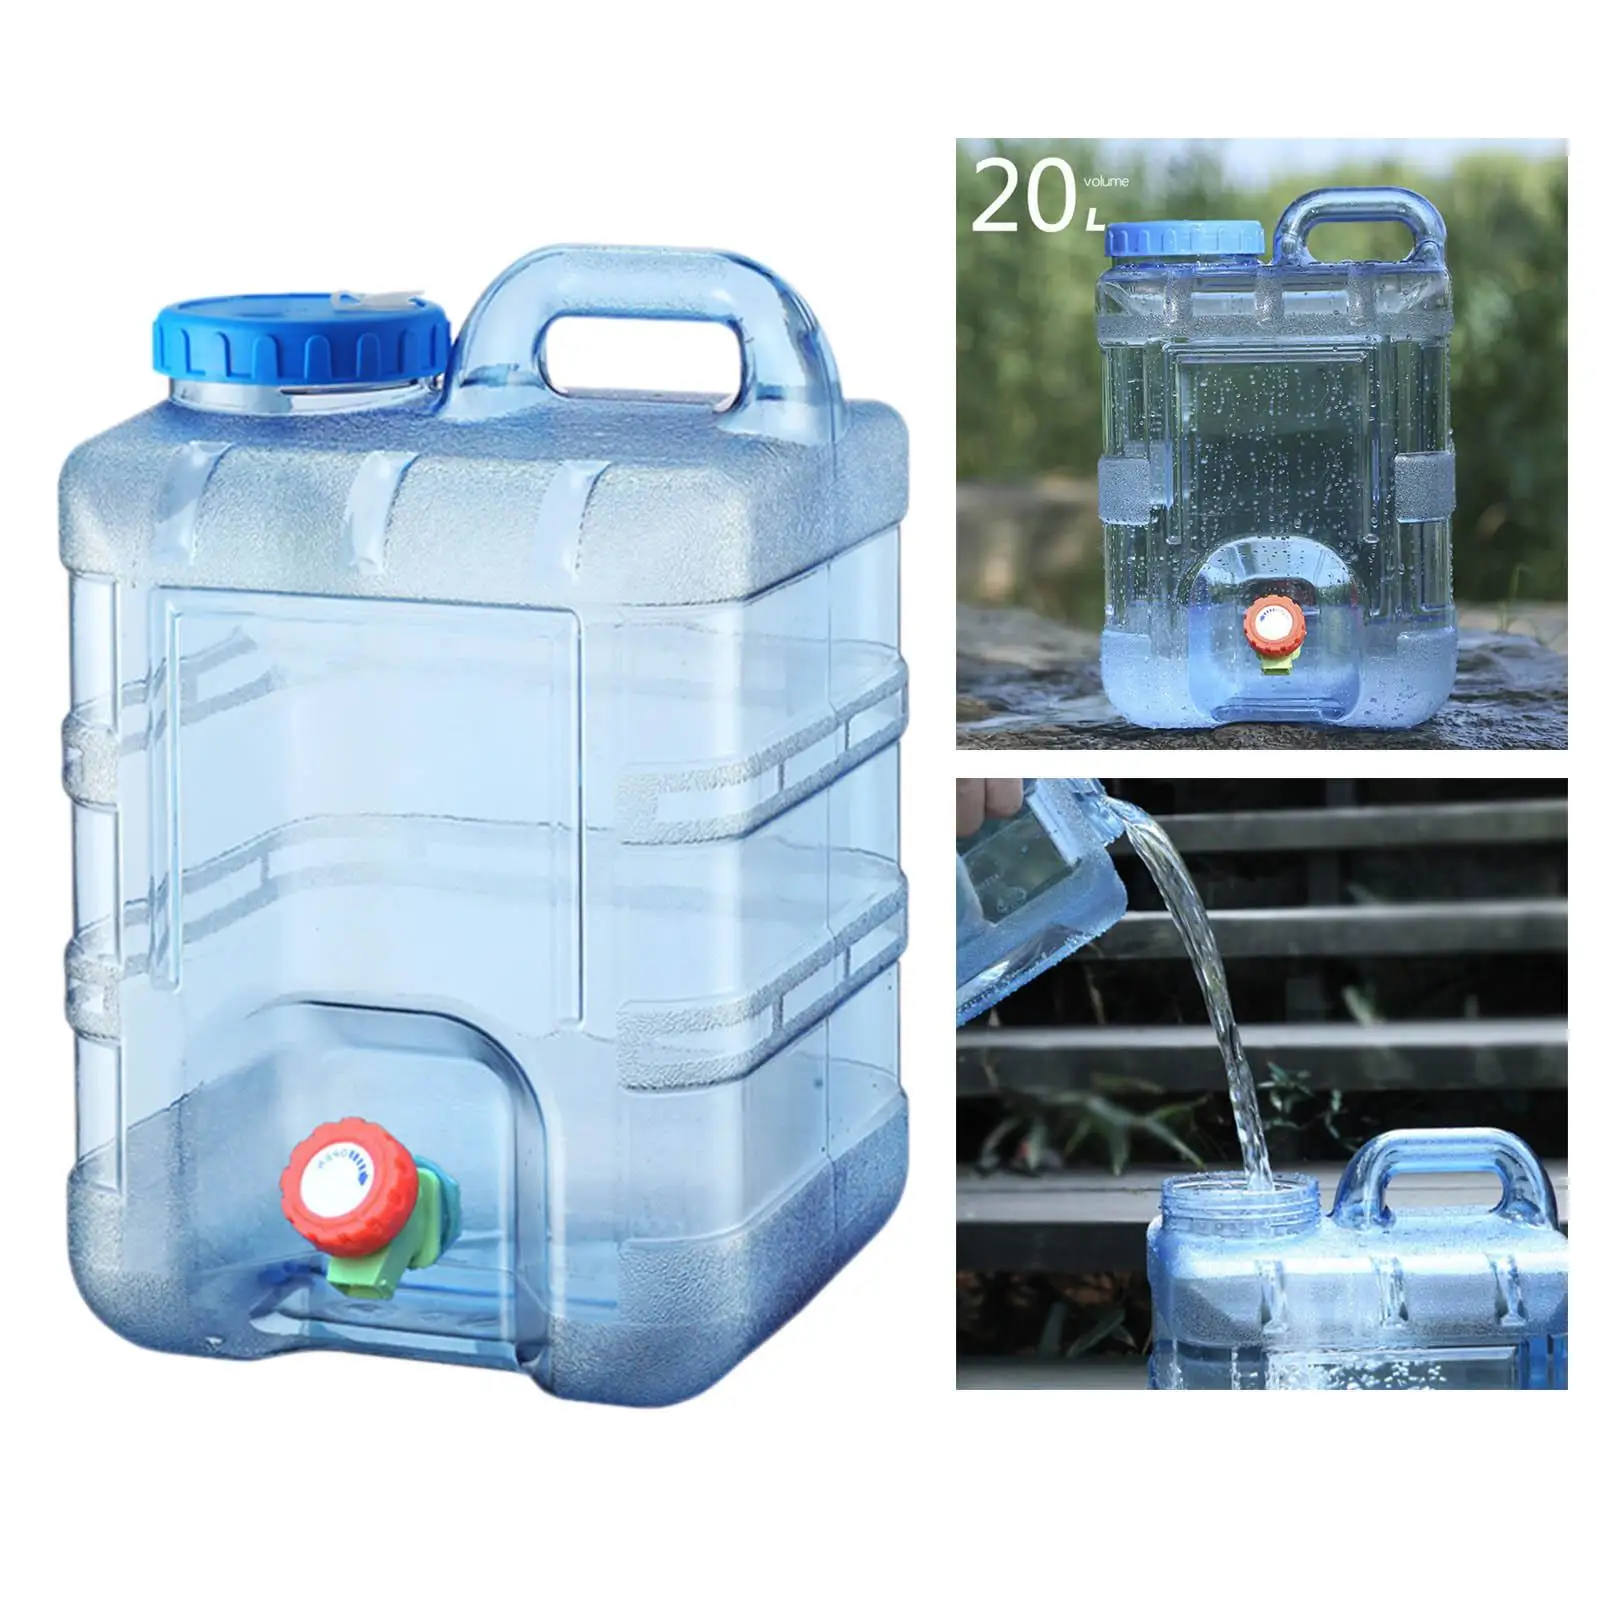 Outdoor Water Bucket Portable Water Tank Container with Faucet for Drinking Camp Cooking Picnic BBQ 20L Capacity Water Tank